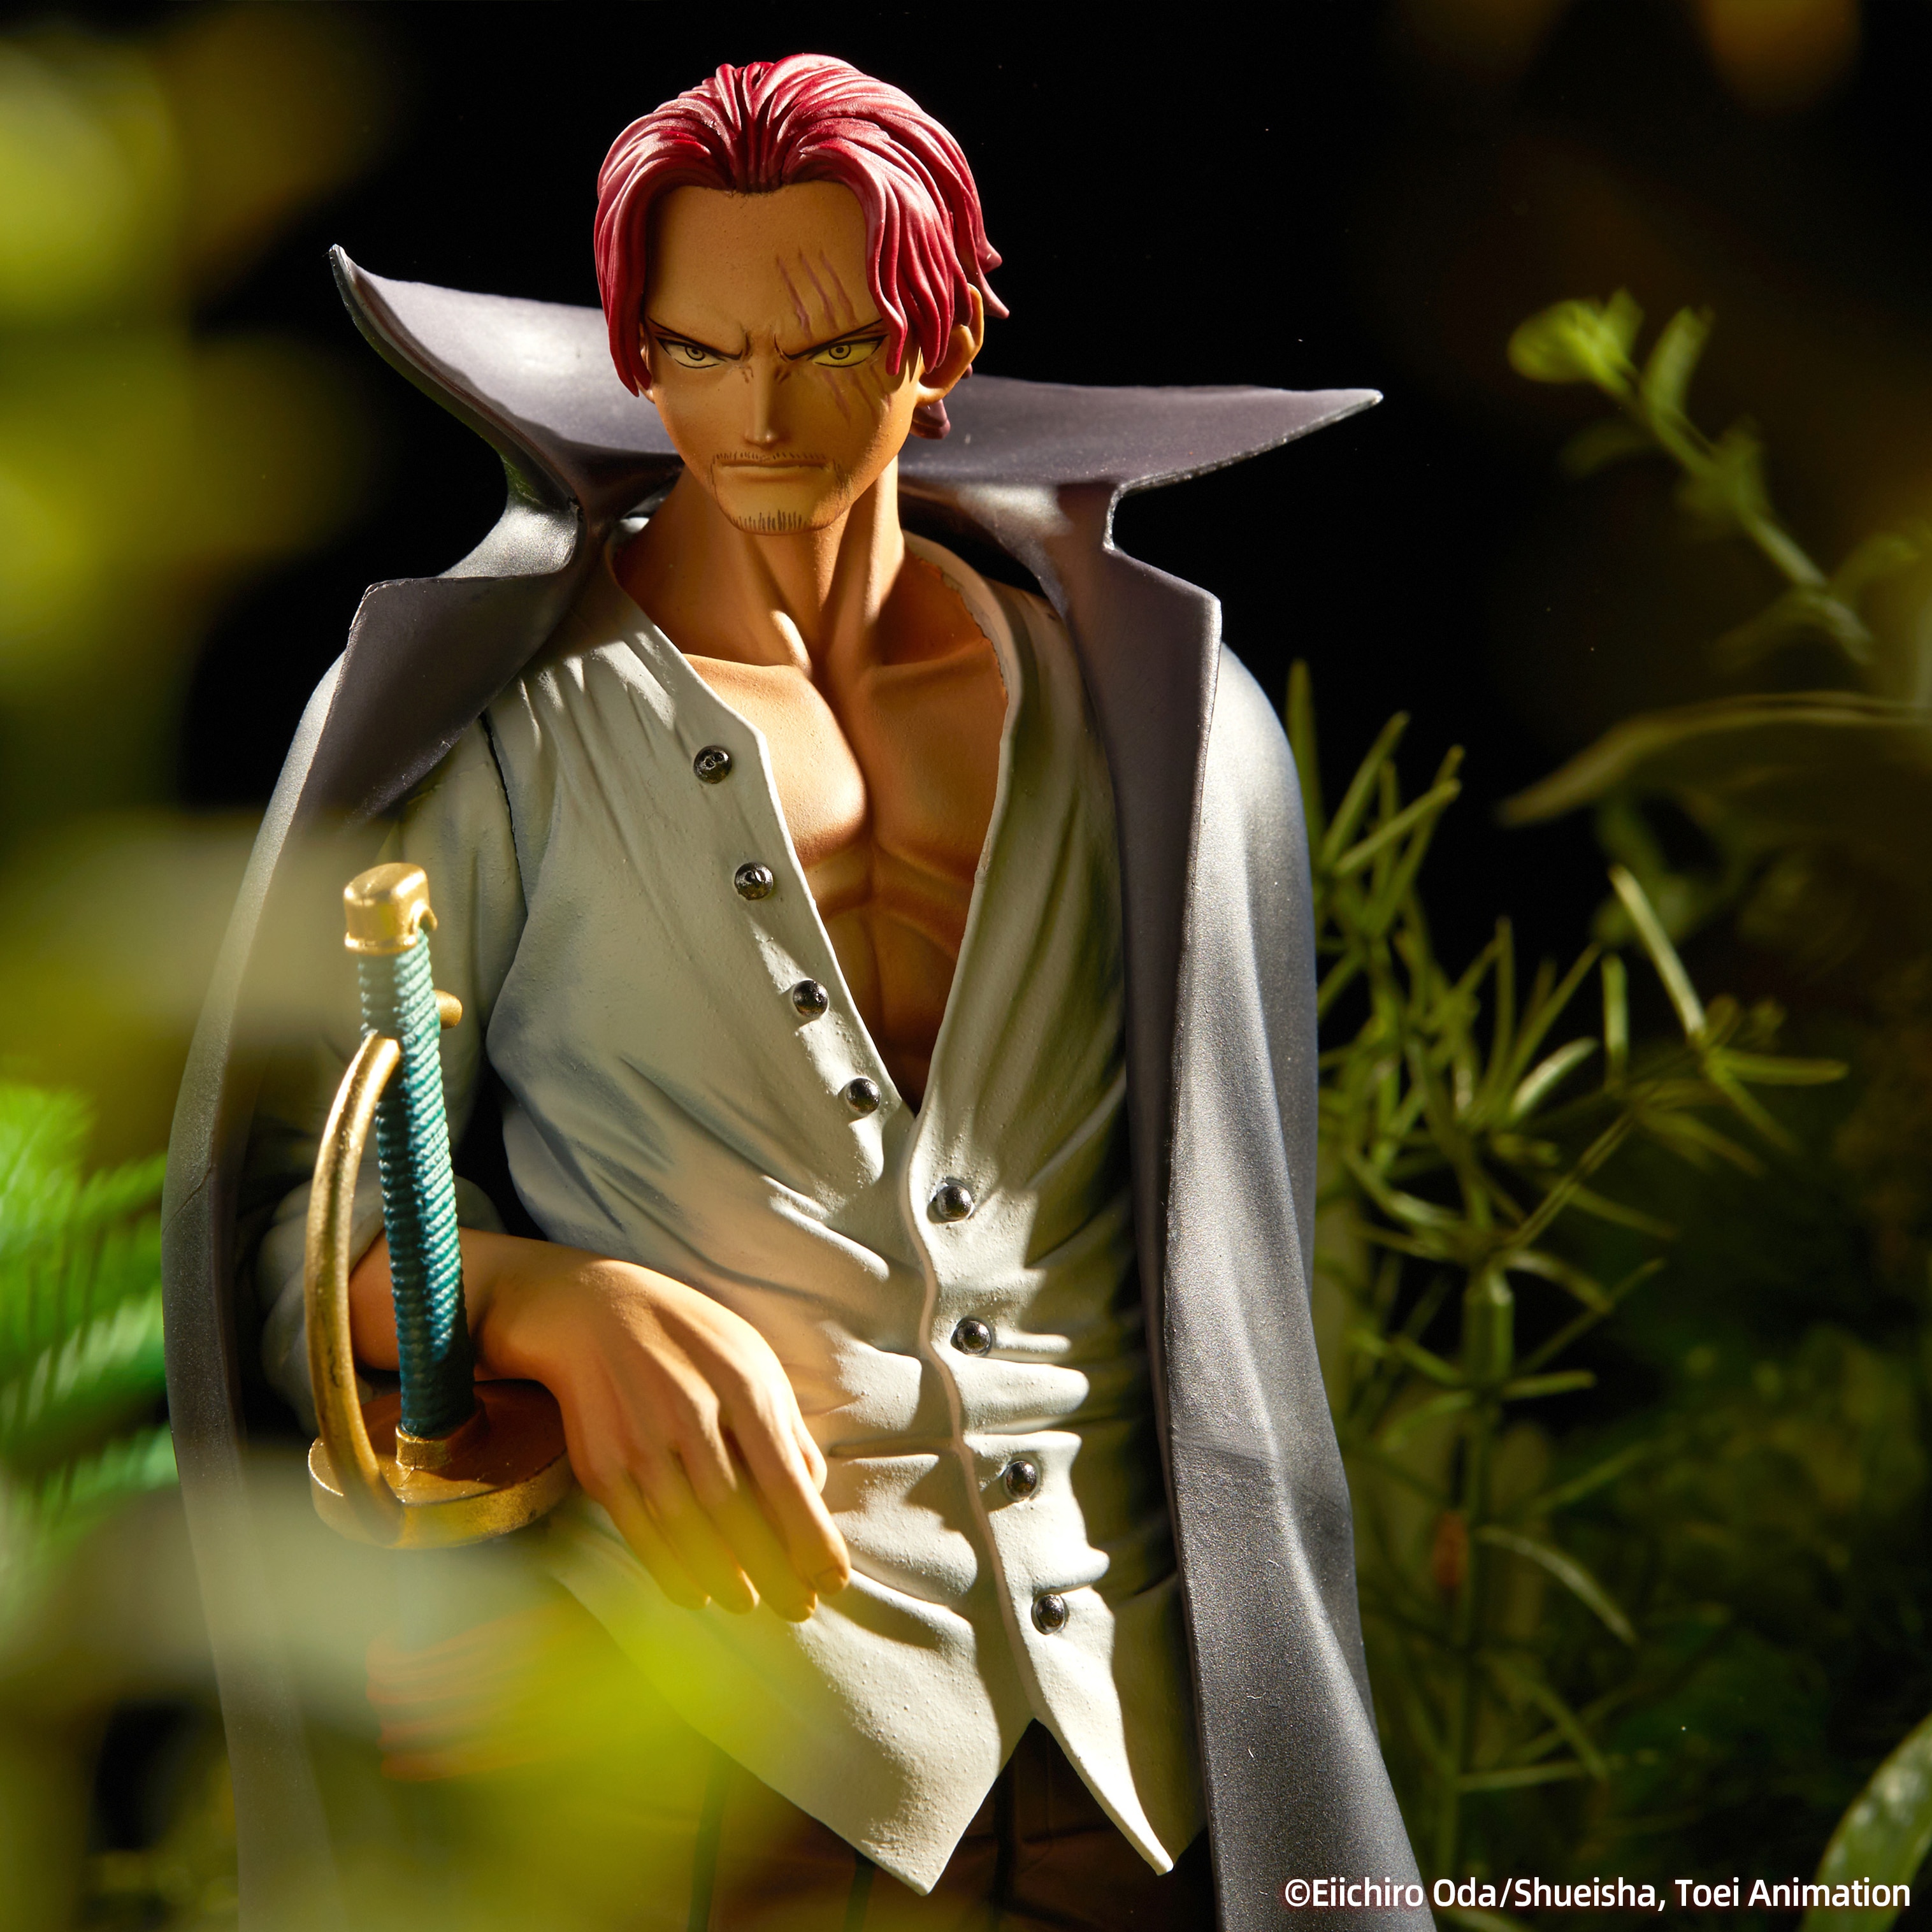 Anime One Piece Action Figure Chronicle Master Stars Plece The Shanks Red Ver Pvc Figurine Collection 5 - One Piece Figure